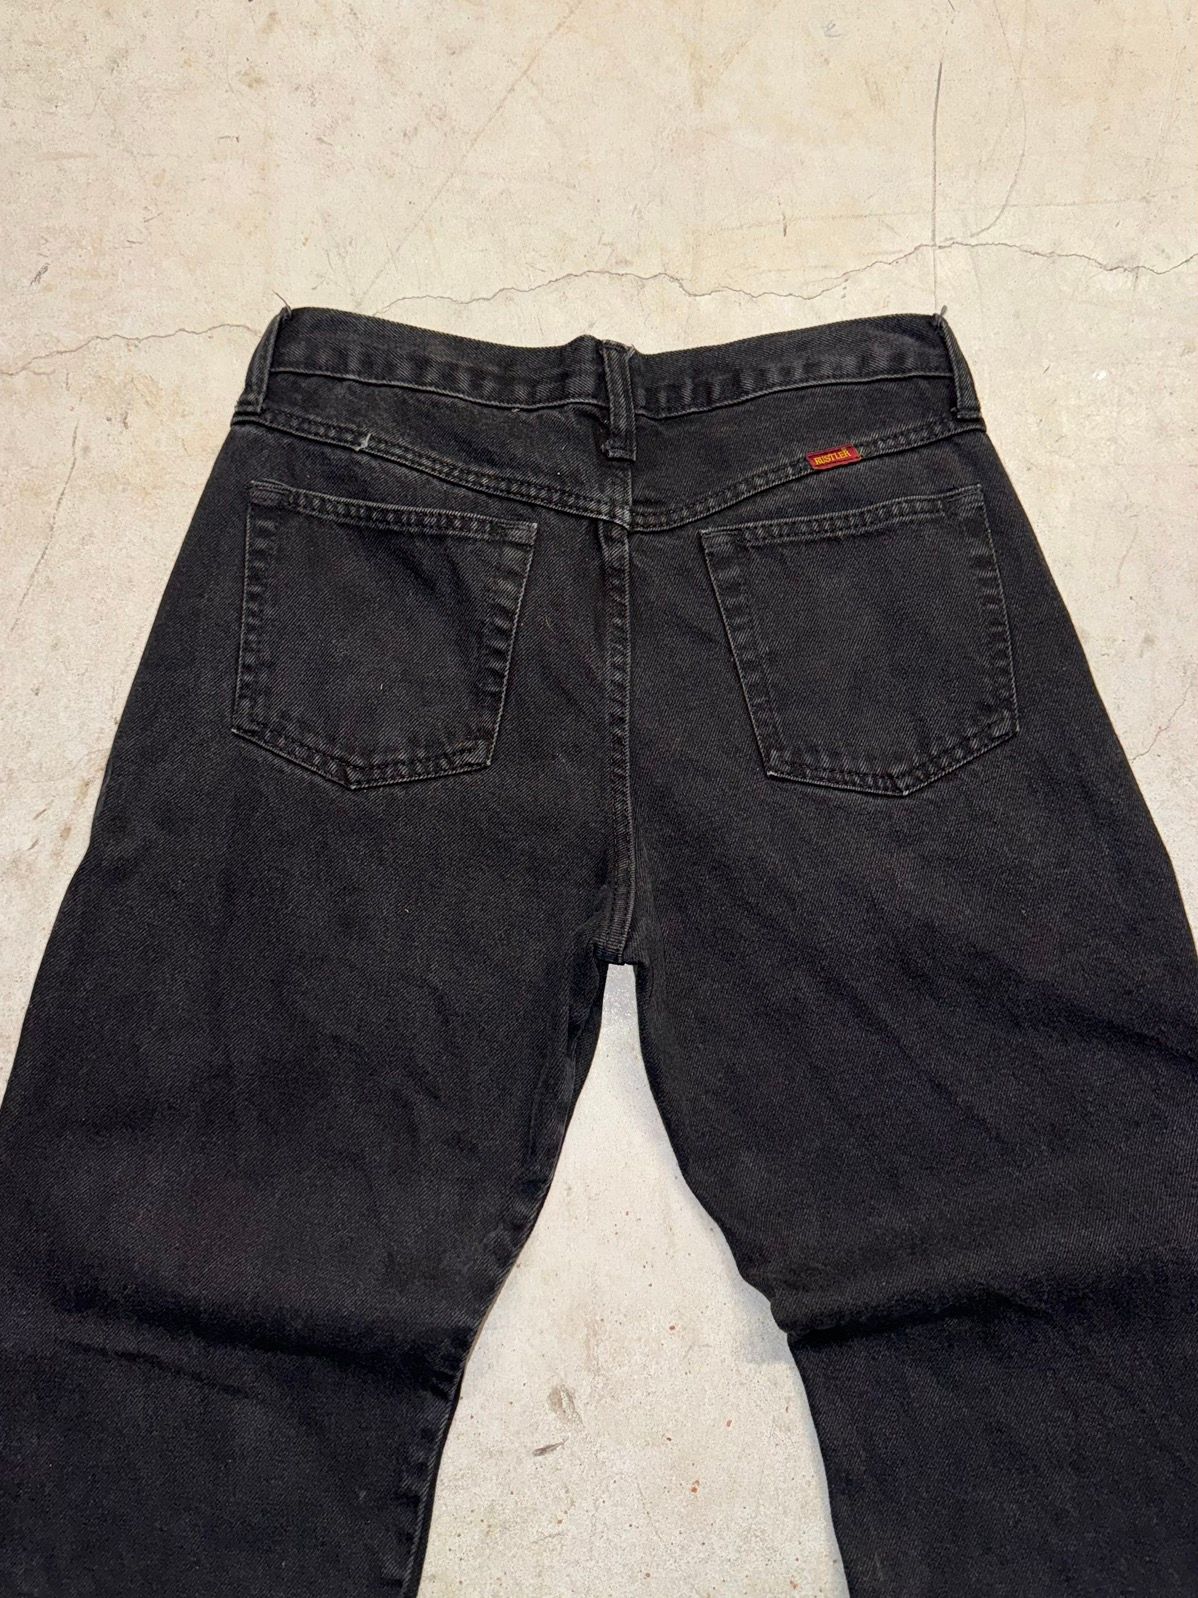 Vintage Crazy Vintage 90s Carhartt Style Faded Black Baggy Jeans Size US 31 - 6 Thumbnail